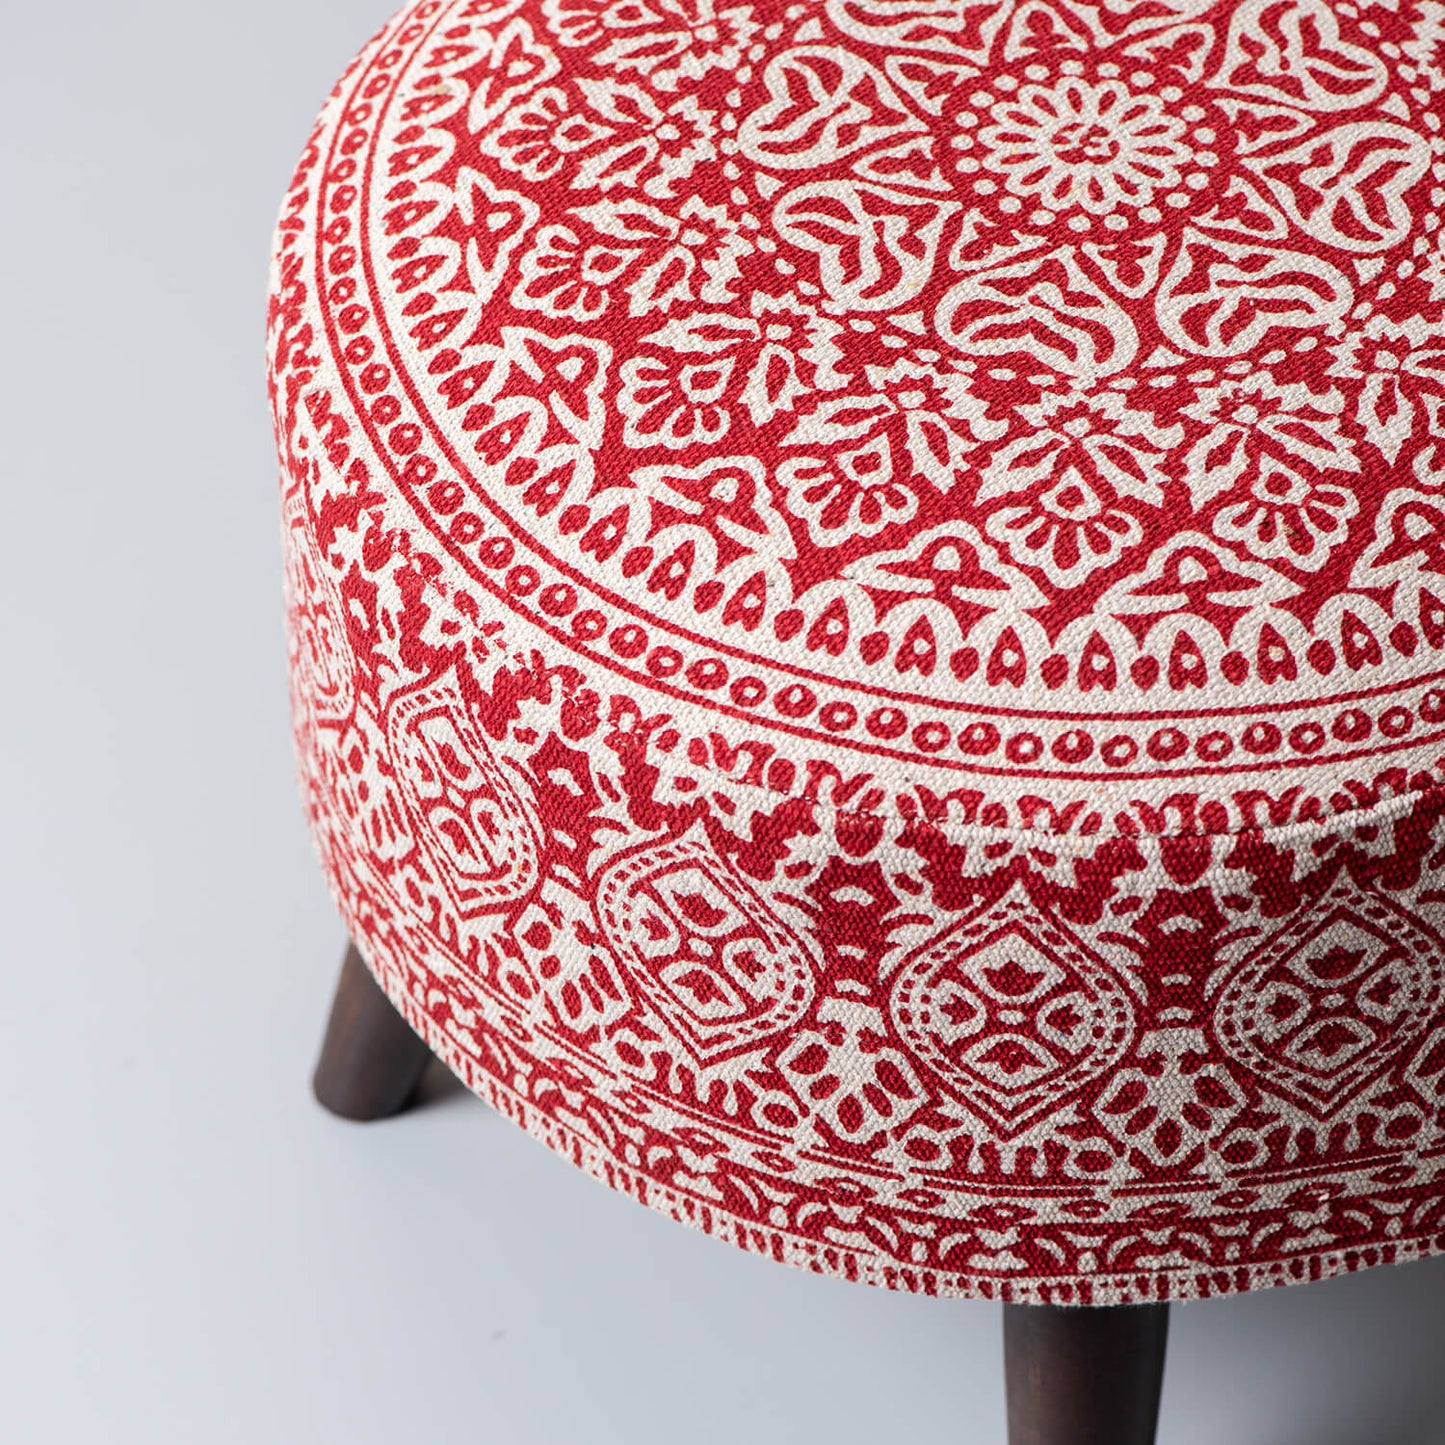 Wooden Ottomans: Classic Imprinted Ottoman (Red)